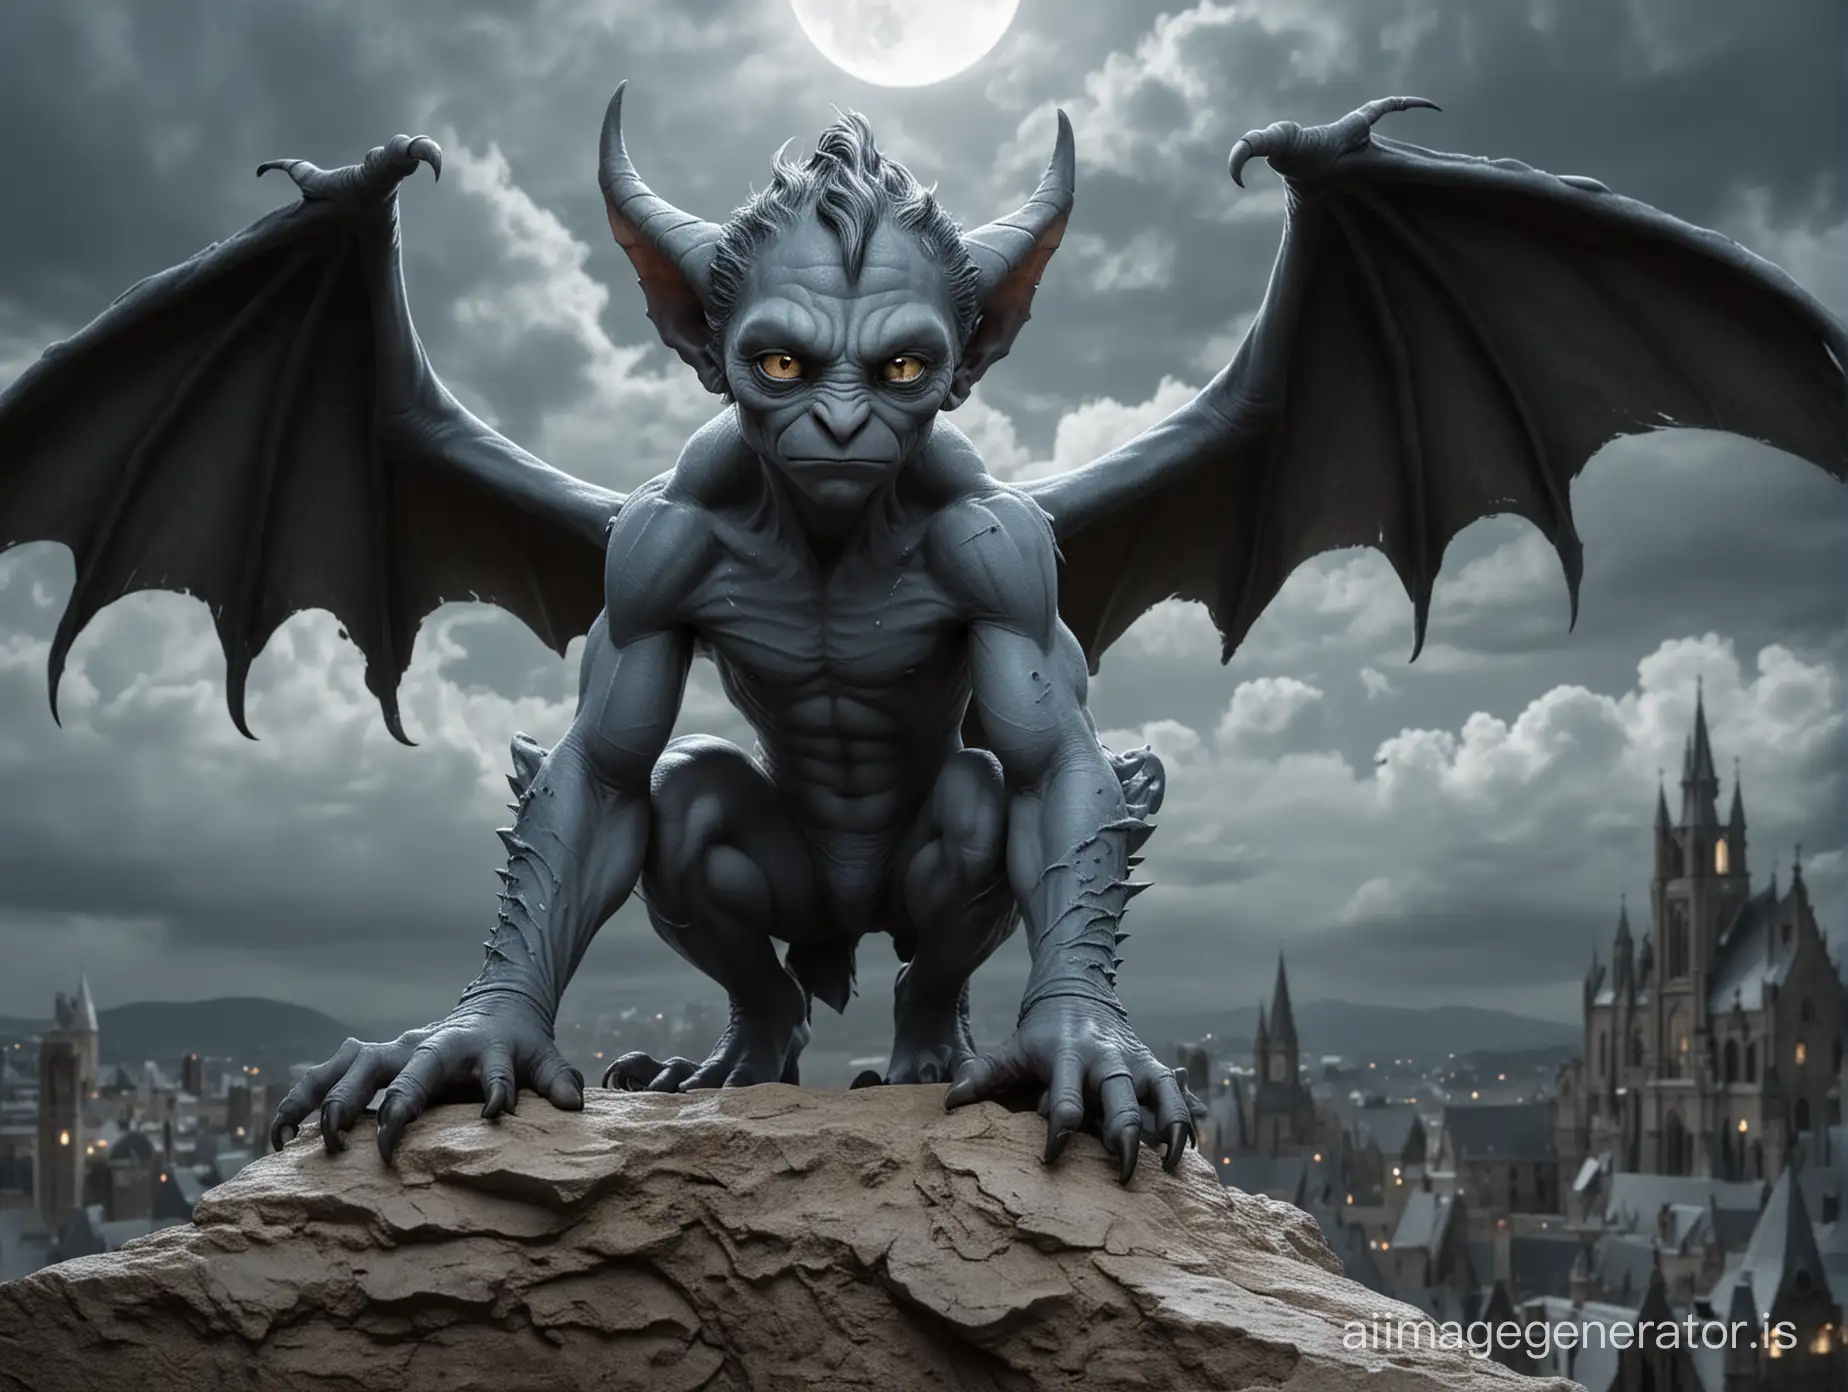 Charming-BoyGargoyle-with-Bat-Wings-and-Tail-on-a-Moonlit-Night